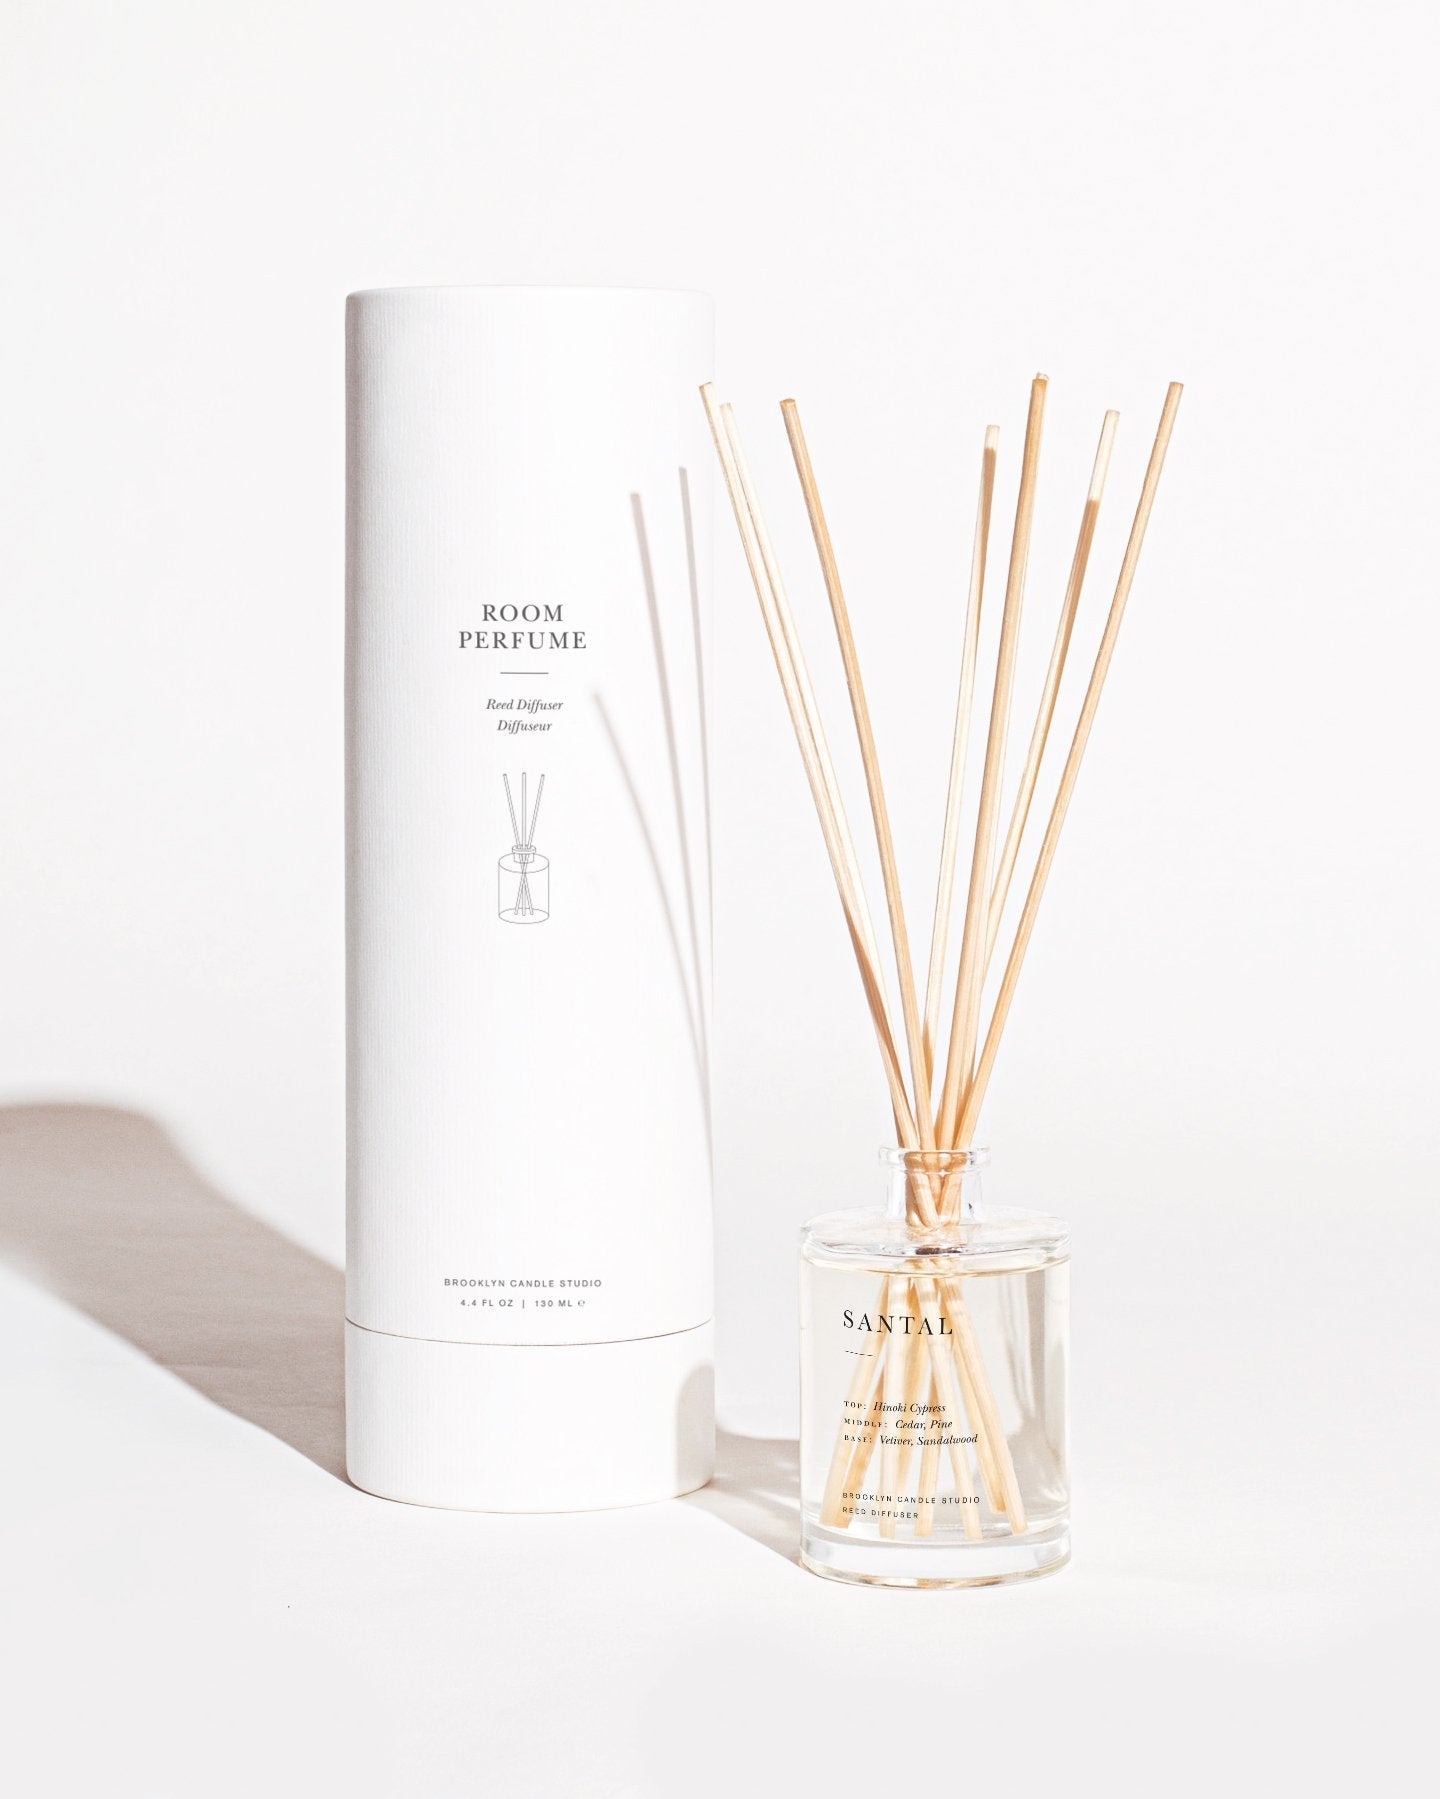 A minimalist photograph features a glass bottle containing a reed diffuser with several wooden sticks. The bottle is labeled "Santal Reed Diffuser by Brooklyn Candle Studio." Next to it, there is a tall, cylindrical white box labeled "Room Perfume," featuring an illustration of the diffuser and hinting at a botanical aroma.